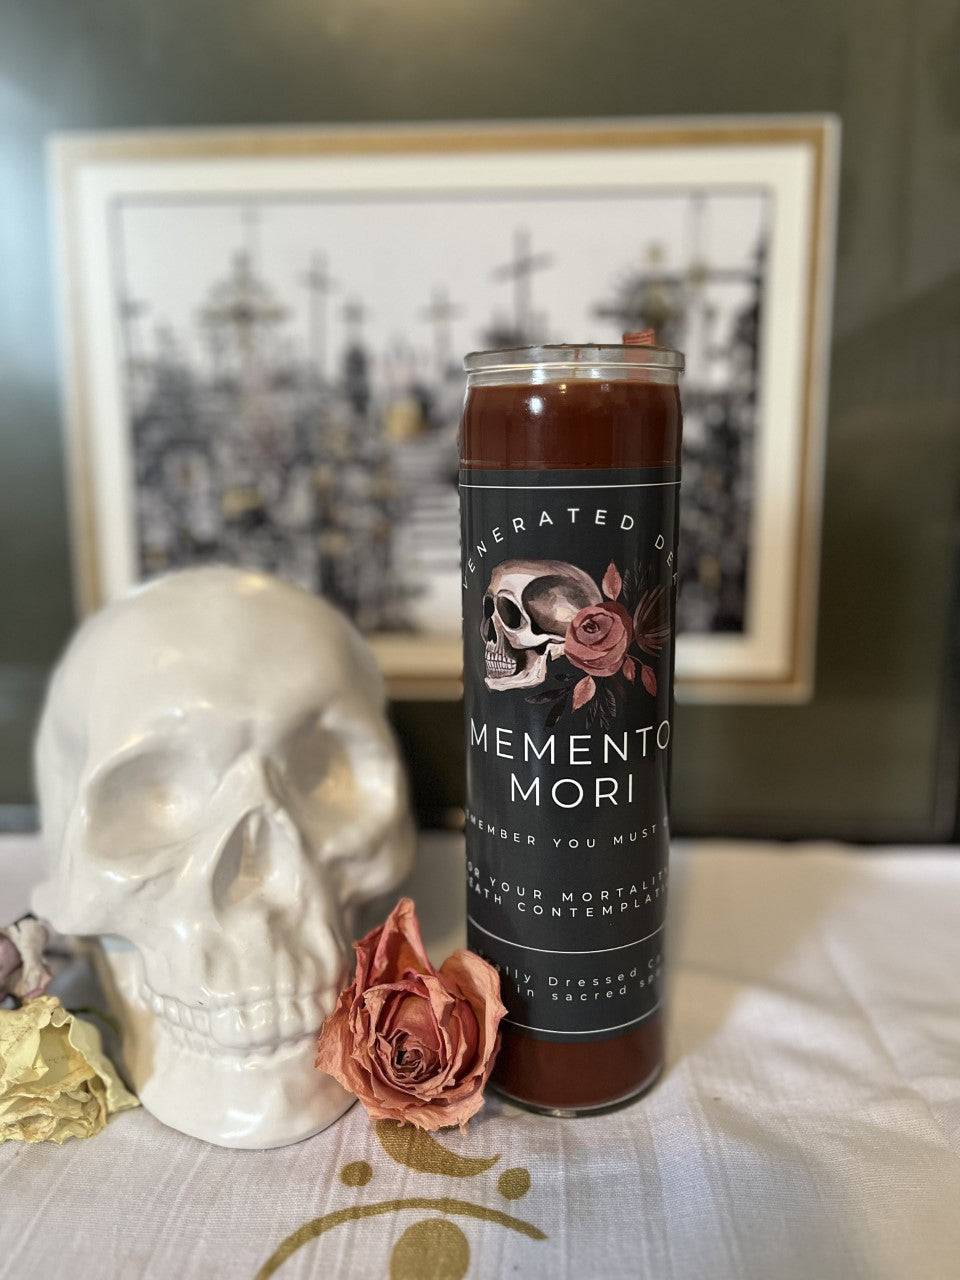 Memento Mori "Remember you Must Die!" Candle